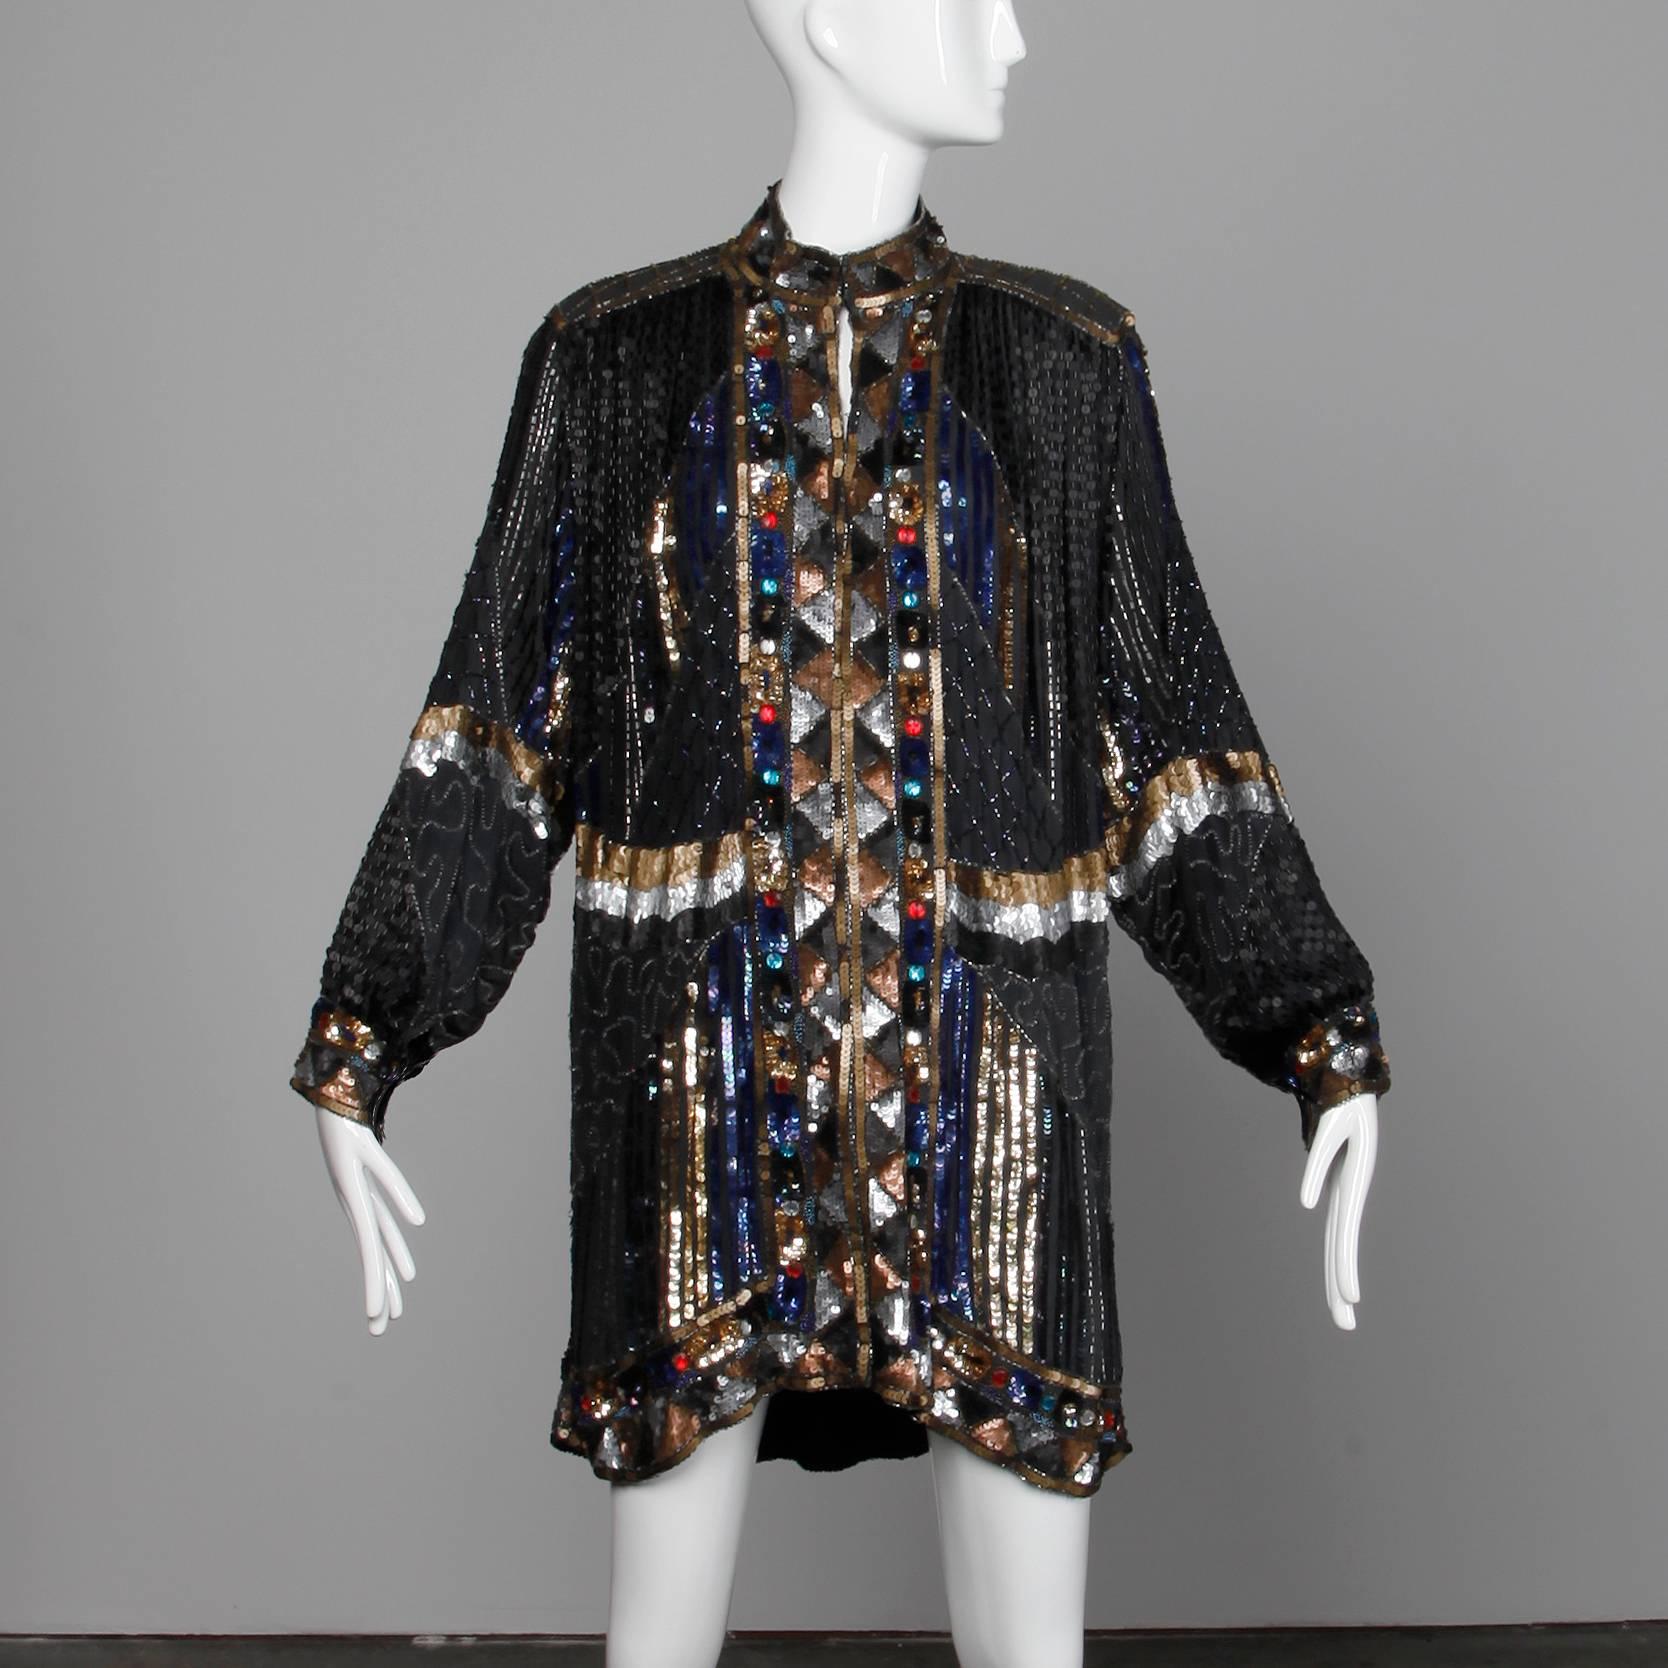 Heavily embellished silk jacket or coat with beading, sequins and rhinestones. Fully lined with front hook closure and snap closure on wrists. Structured shoulder pads can easily be removed if desired. 100% silk, with 100% rayon lining. Free size.